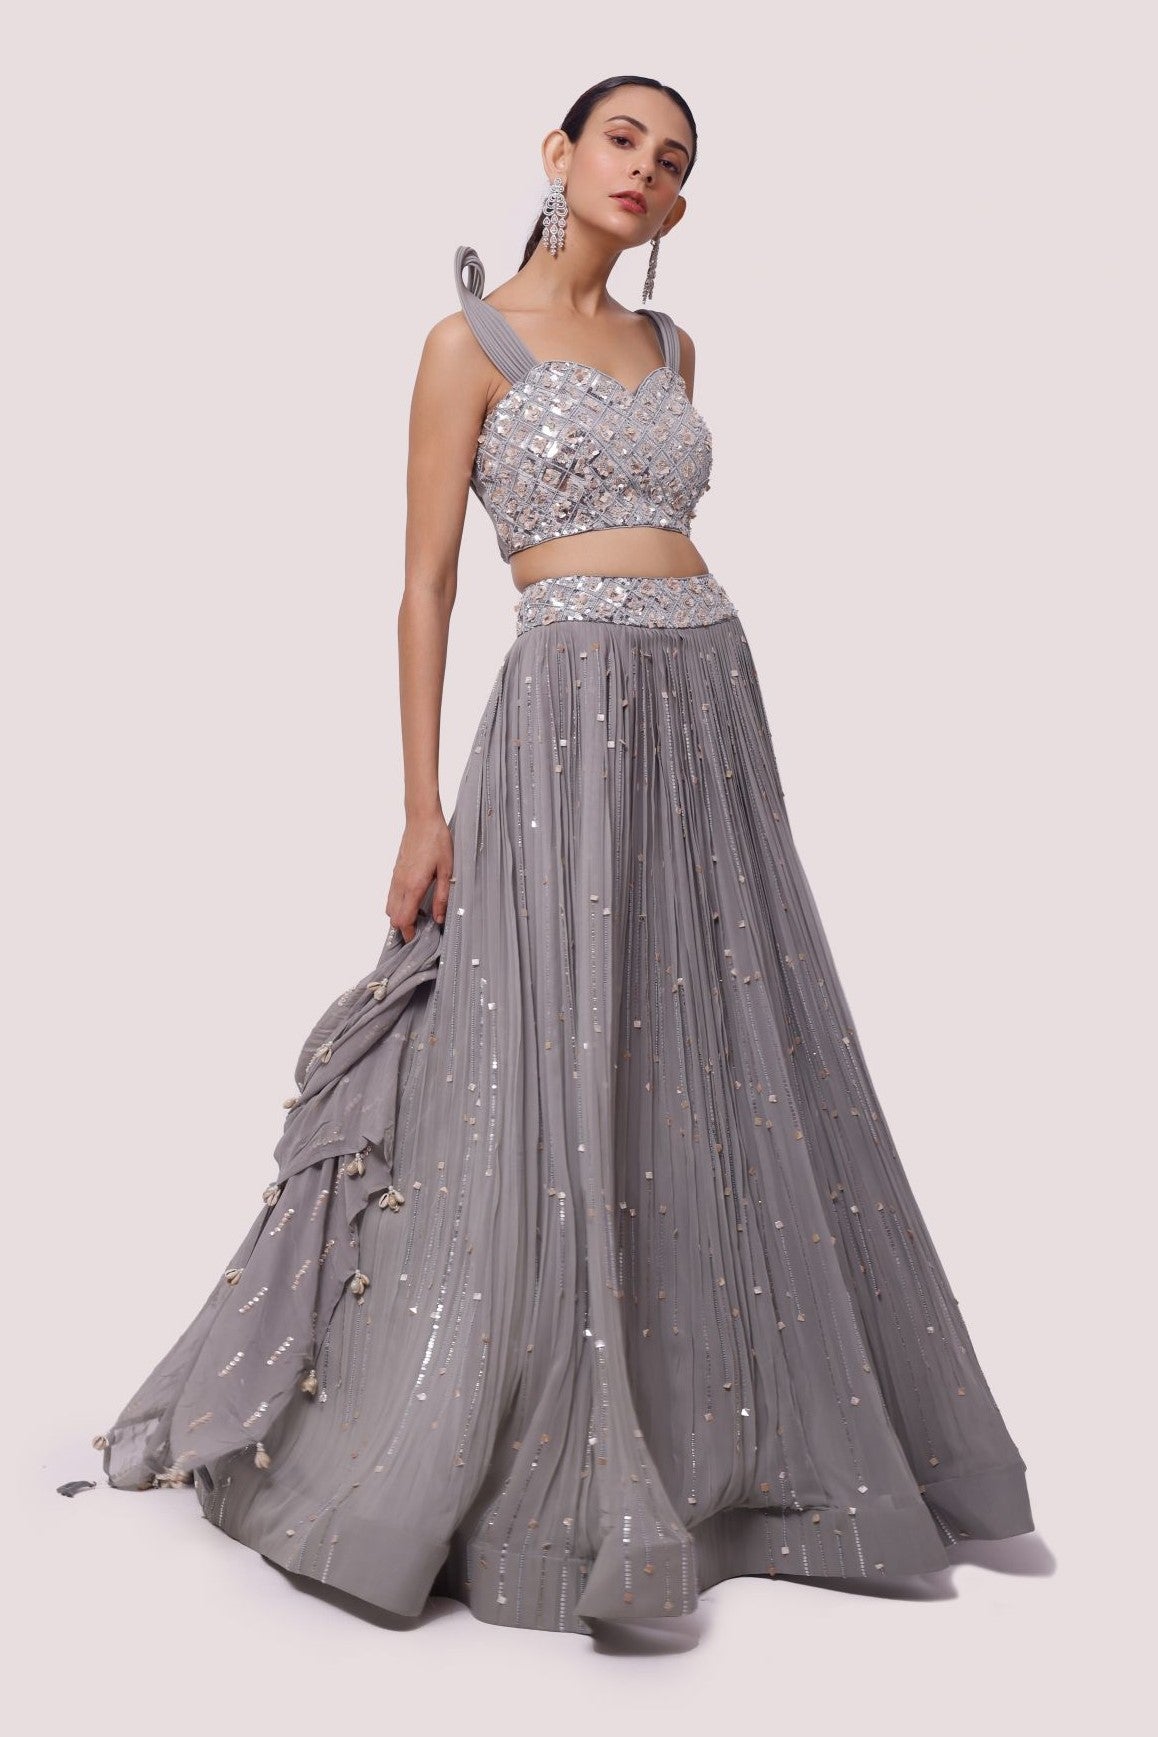 Buy a beautiful grey strappy sleeves lehenga featuring mirror work. The lehenga is perfect for weddings, and sangeet parties. Shop online from Pure Elegance.